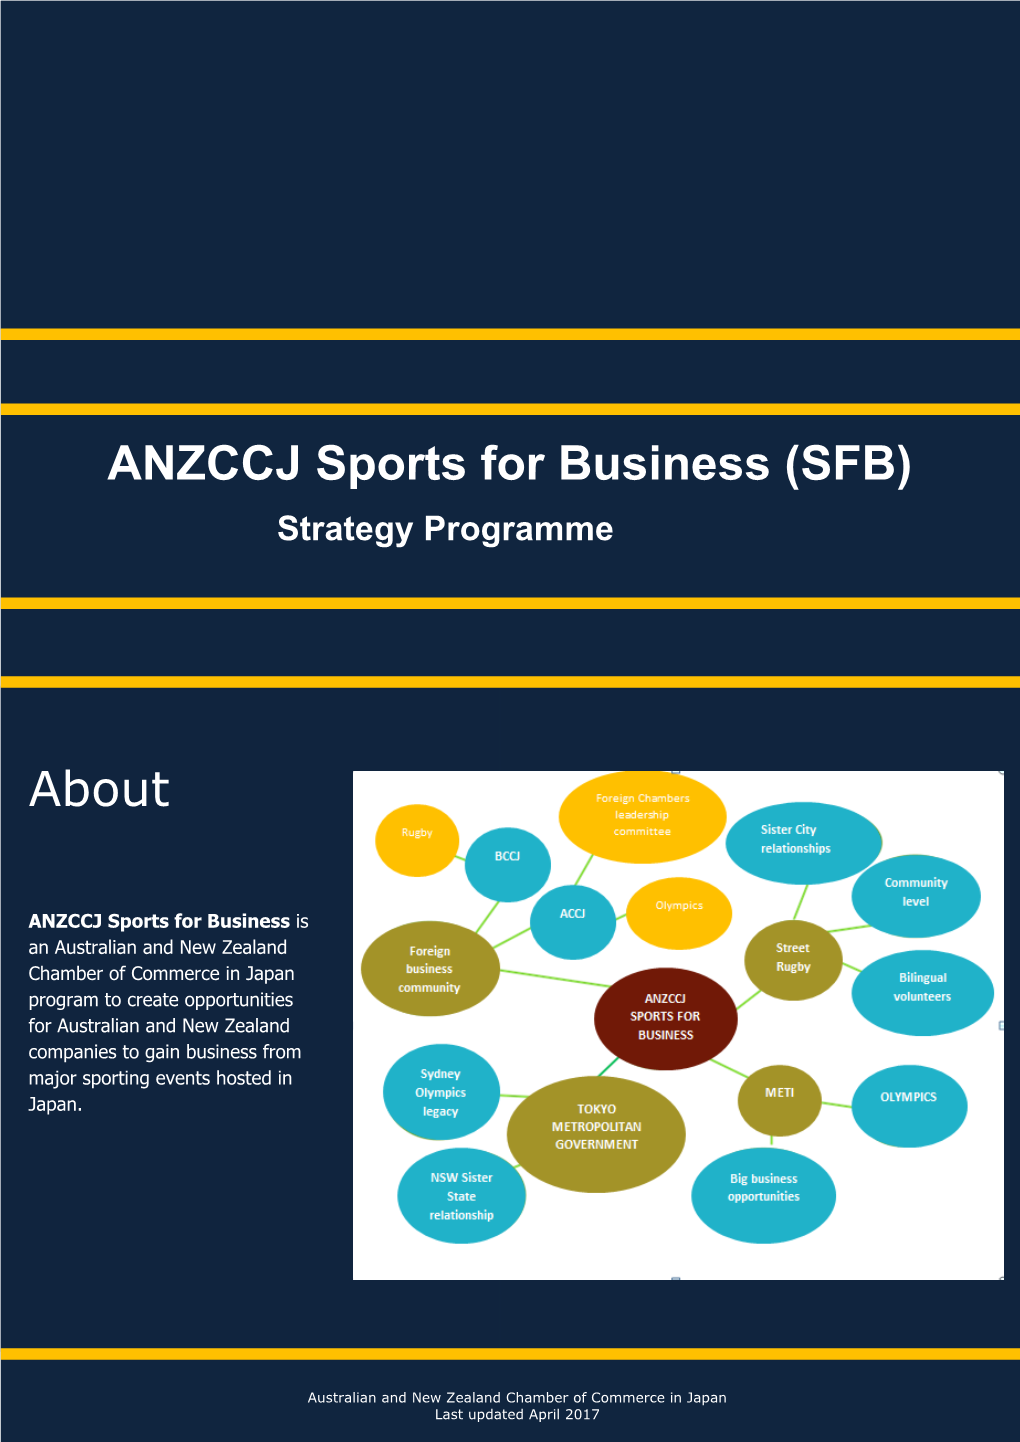 About ANZCCJ Sports for Business (SFB)